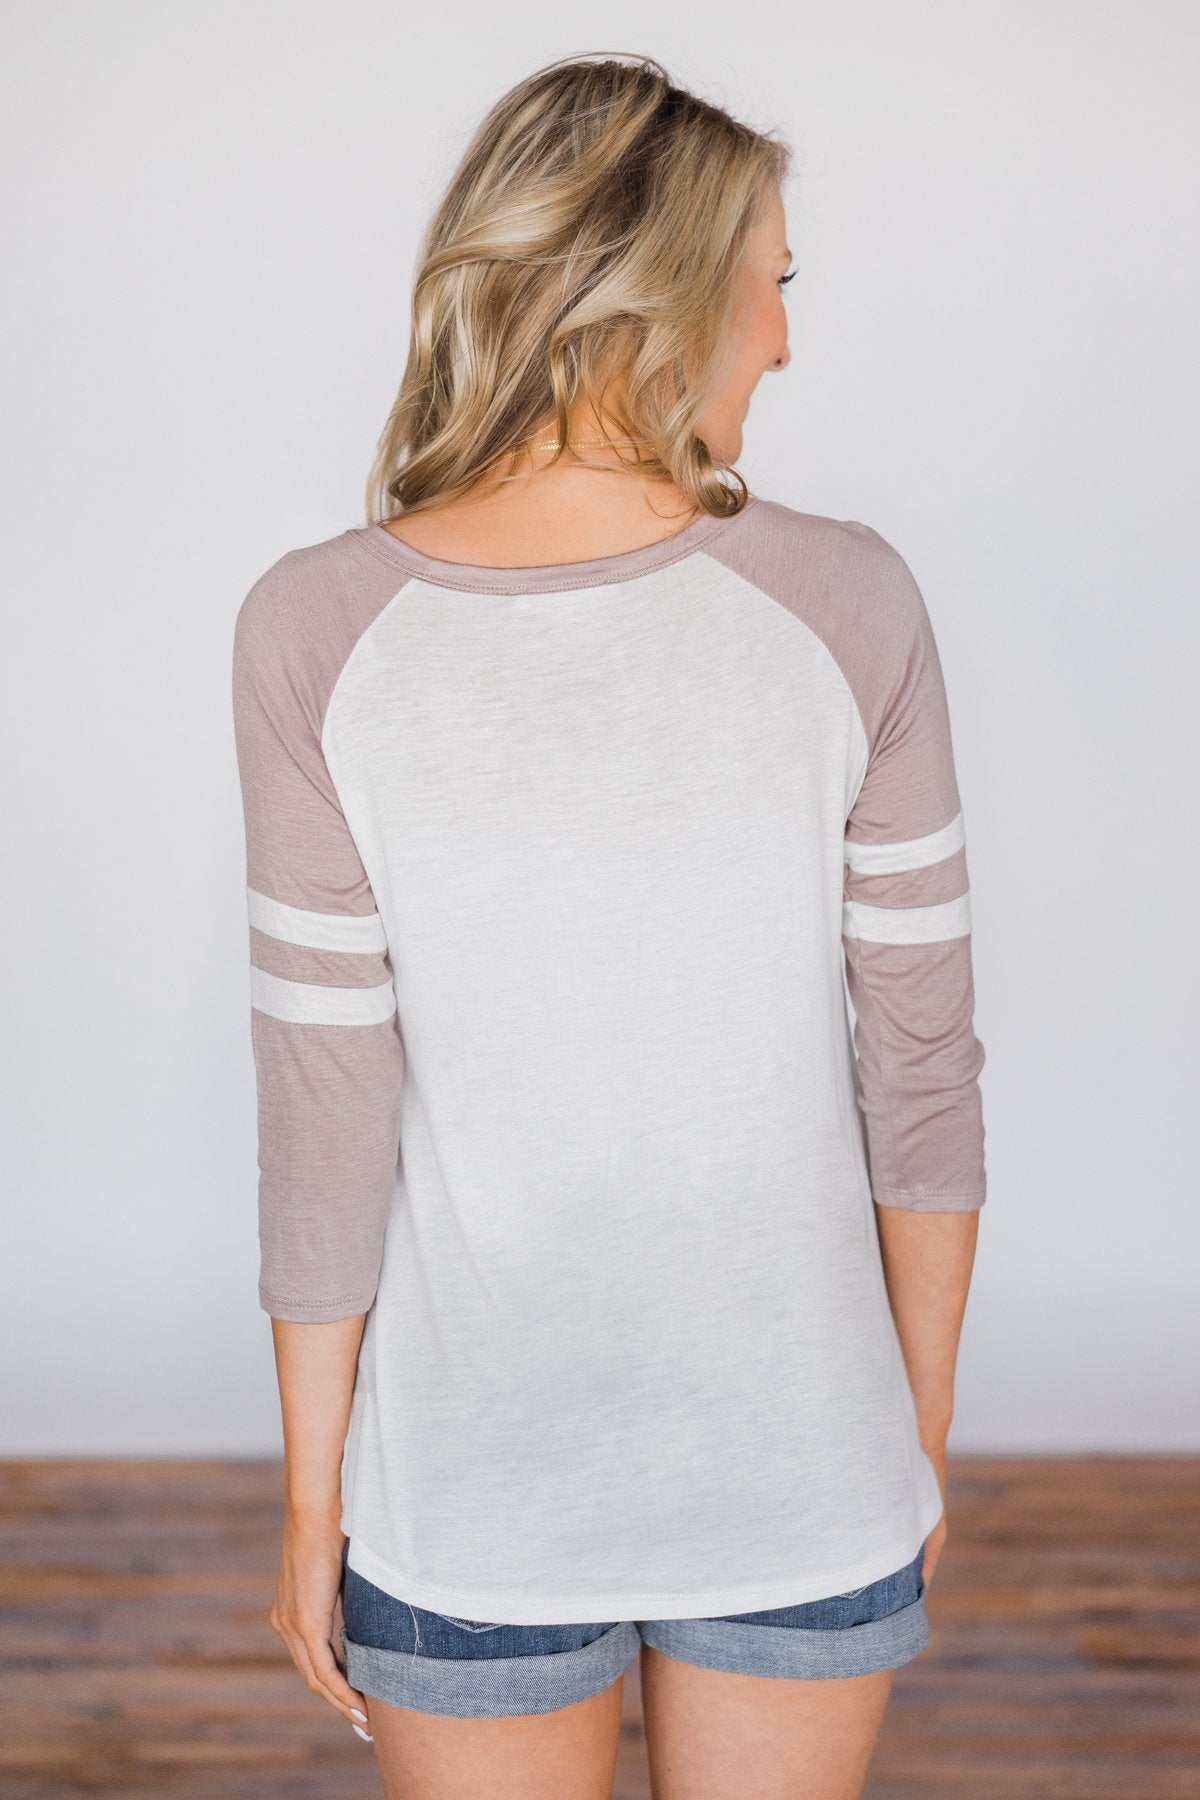 Lace Up Baseball Tee- Taupe